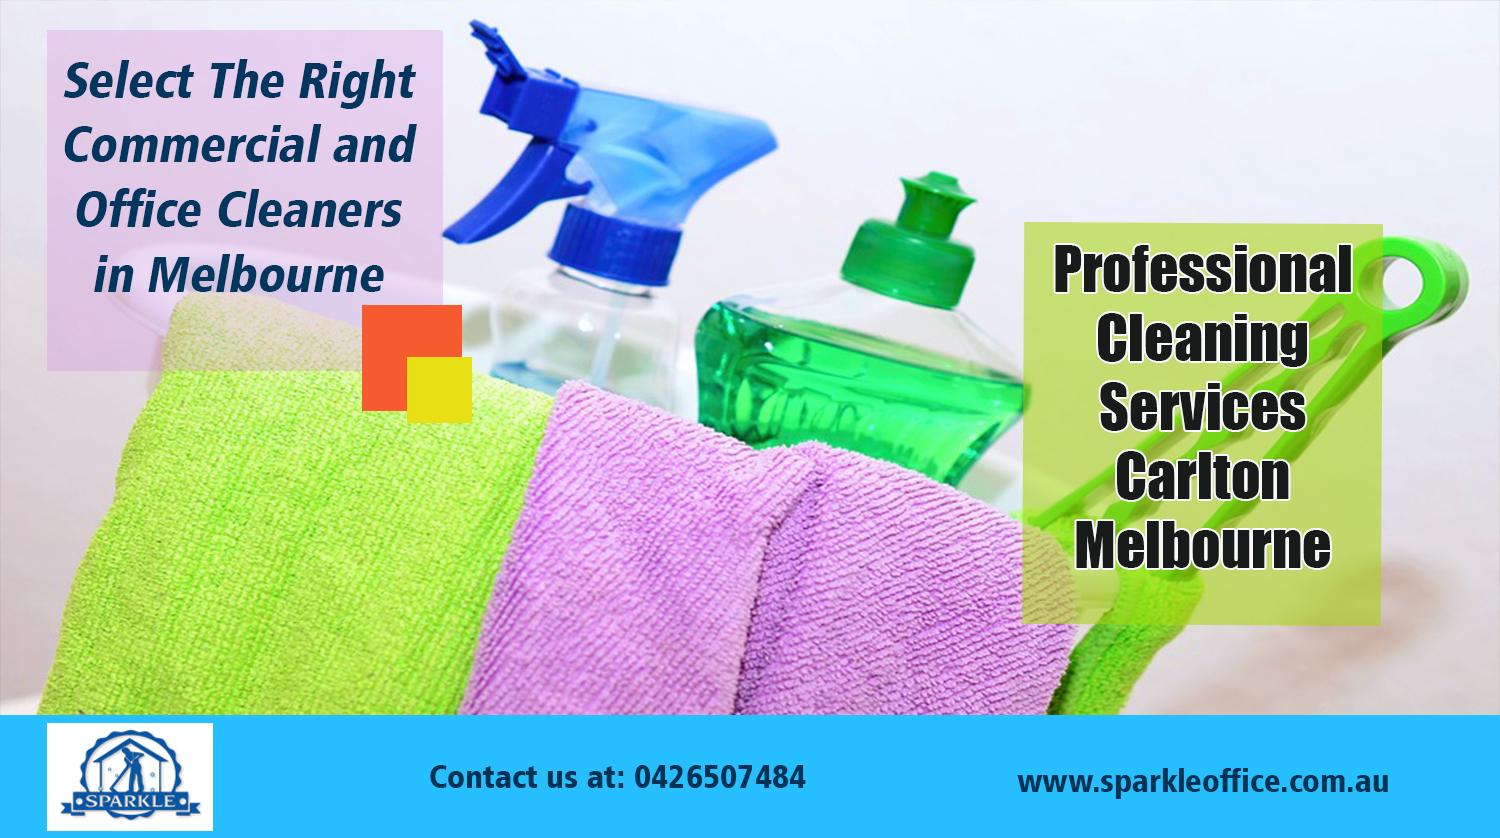 Professional Cleaning Services Carlton Melbourne